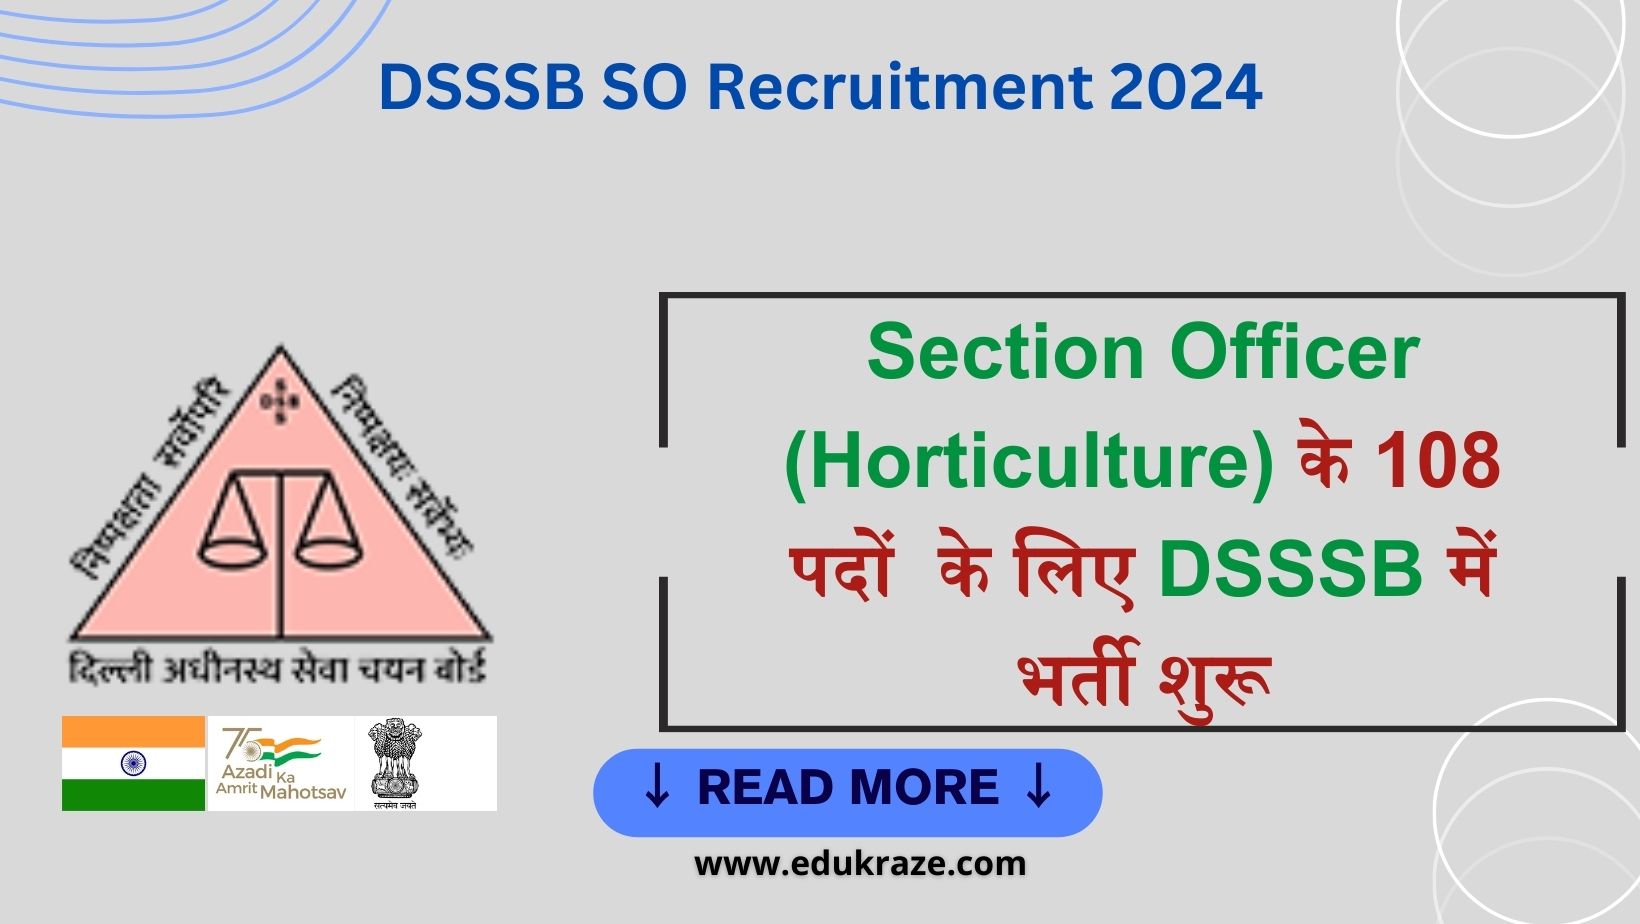 DSSSB SO Recruitment 2024 Out for 108 Section Officer (Horticulture) Posts